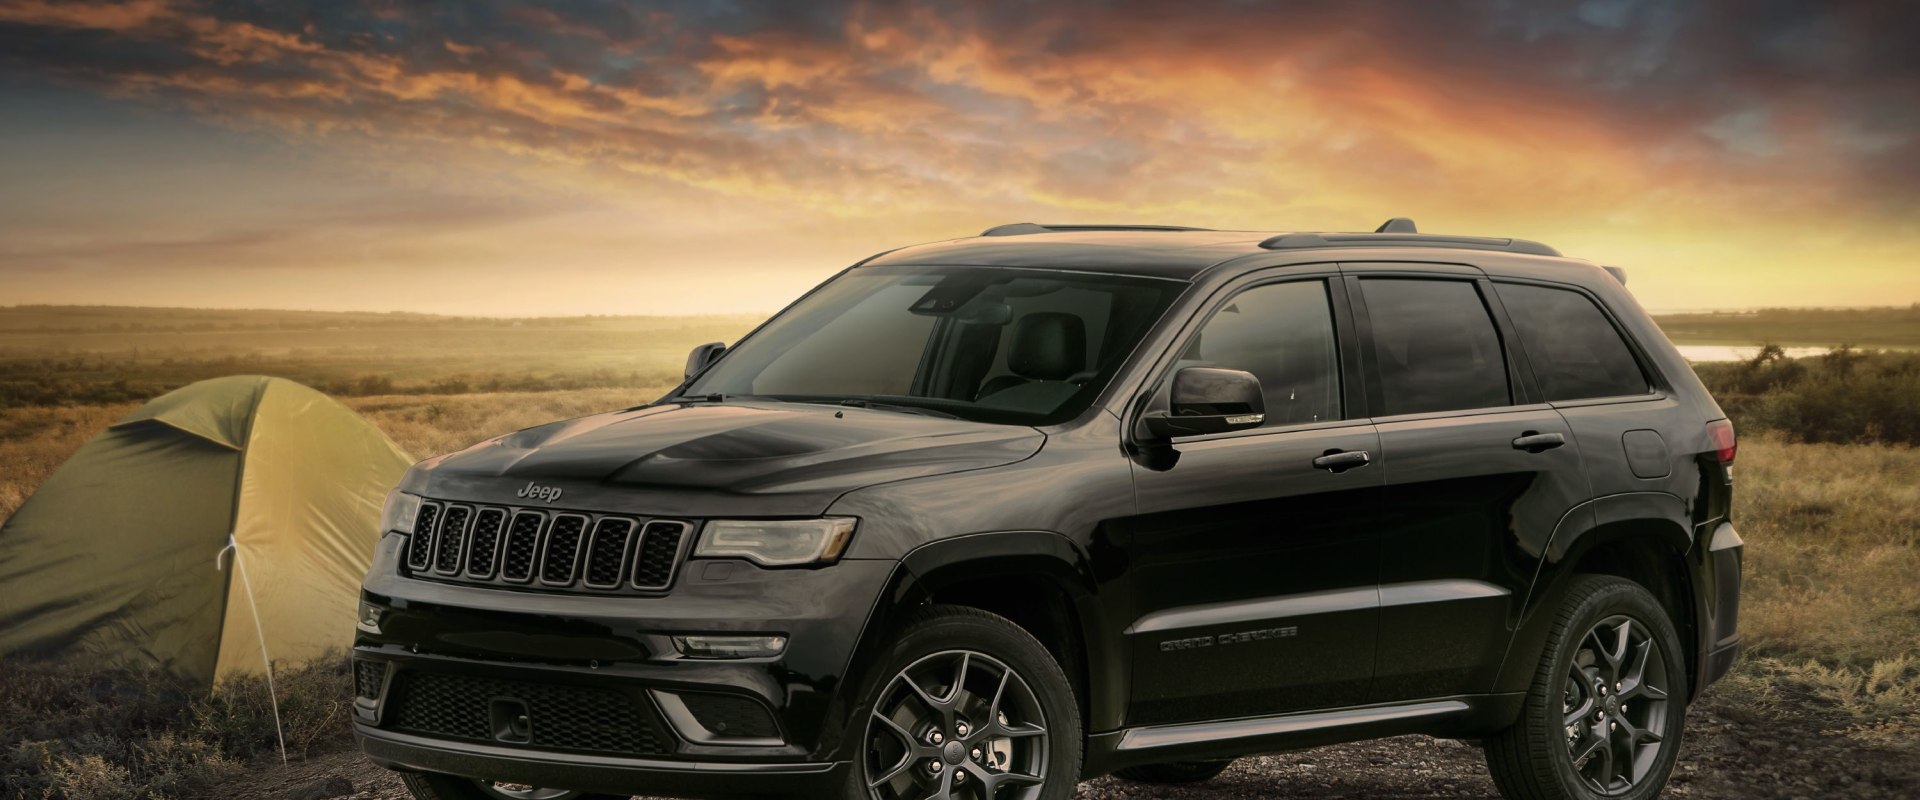 Jeep Grand Cherokee: An Overview of the Classic Off-road Vehicle